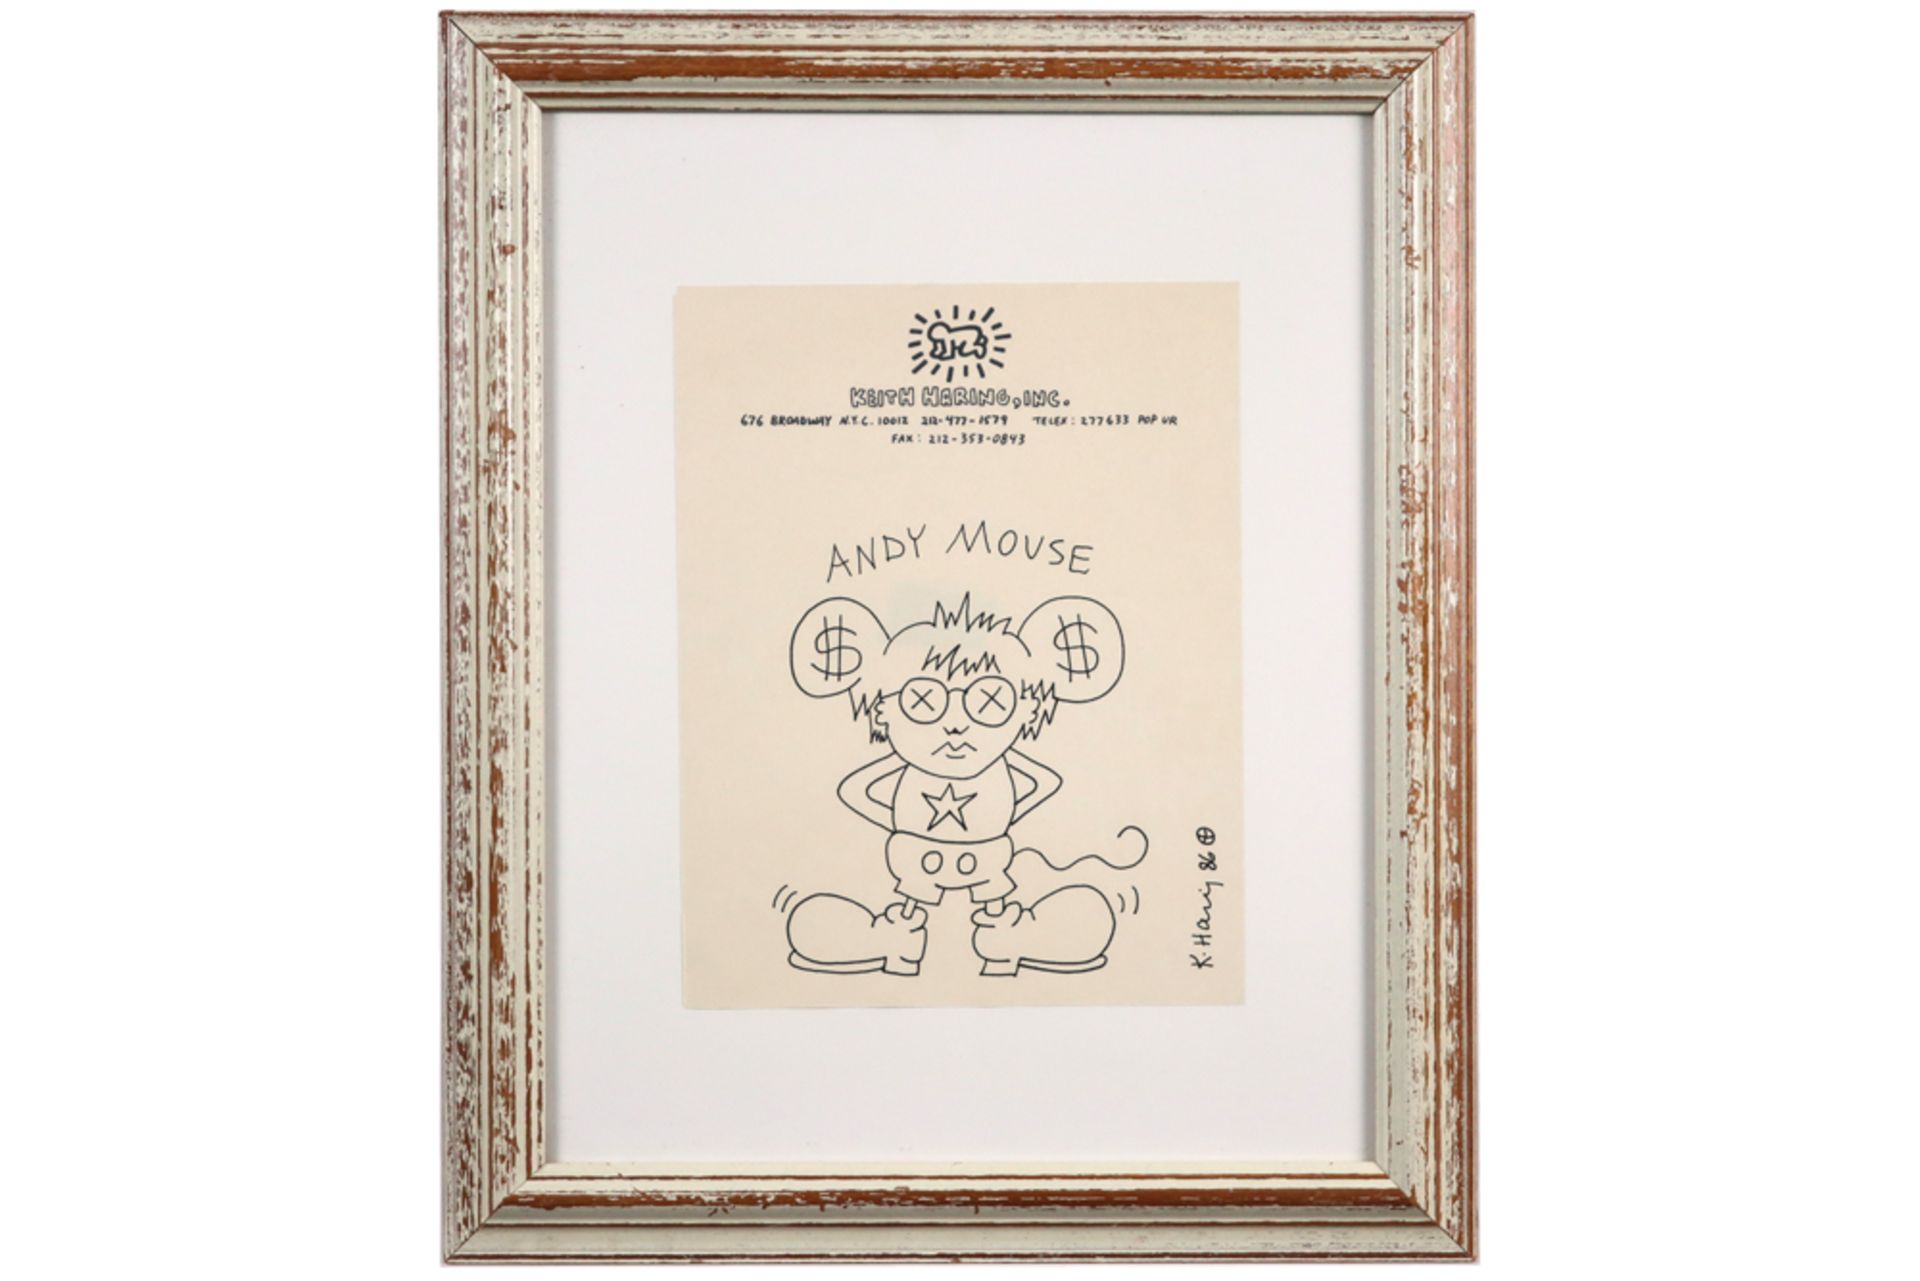 Keith Haring "Andy Mouse" drawing on writing paper of "The Estate" - signed and dated (19)86 || - Image 4 of 4